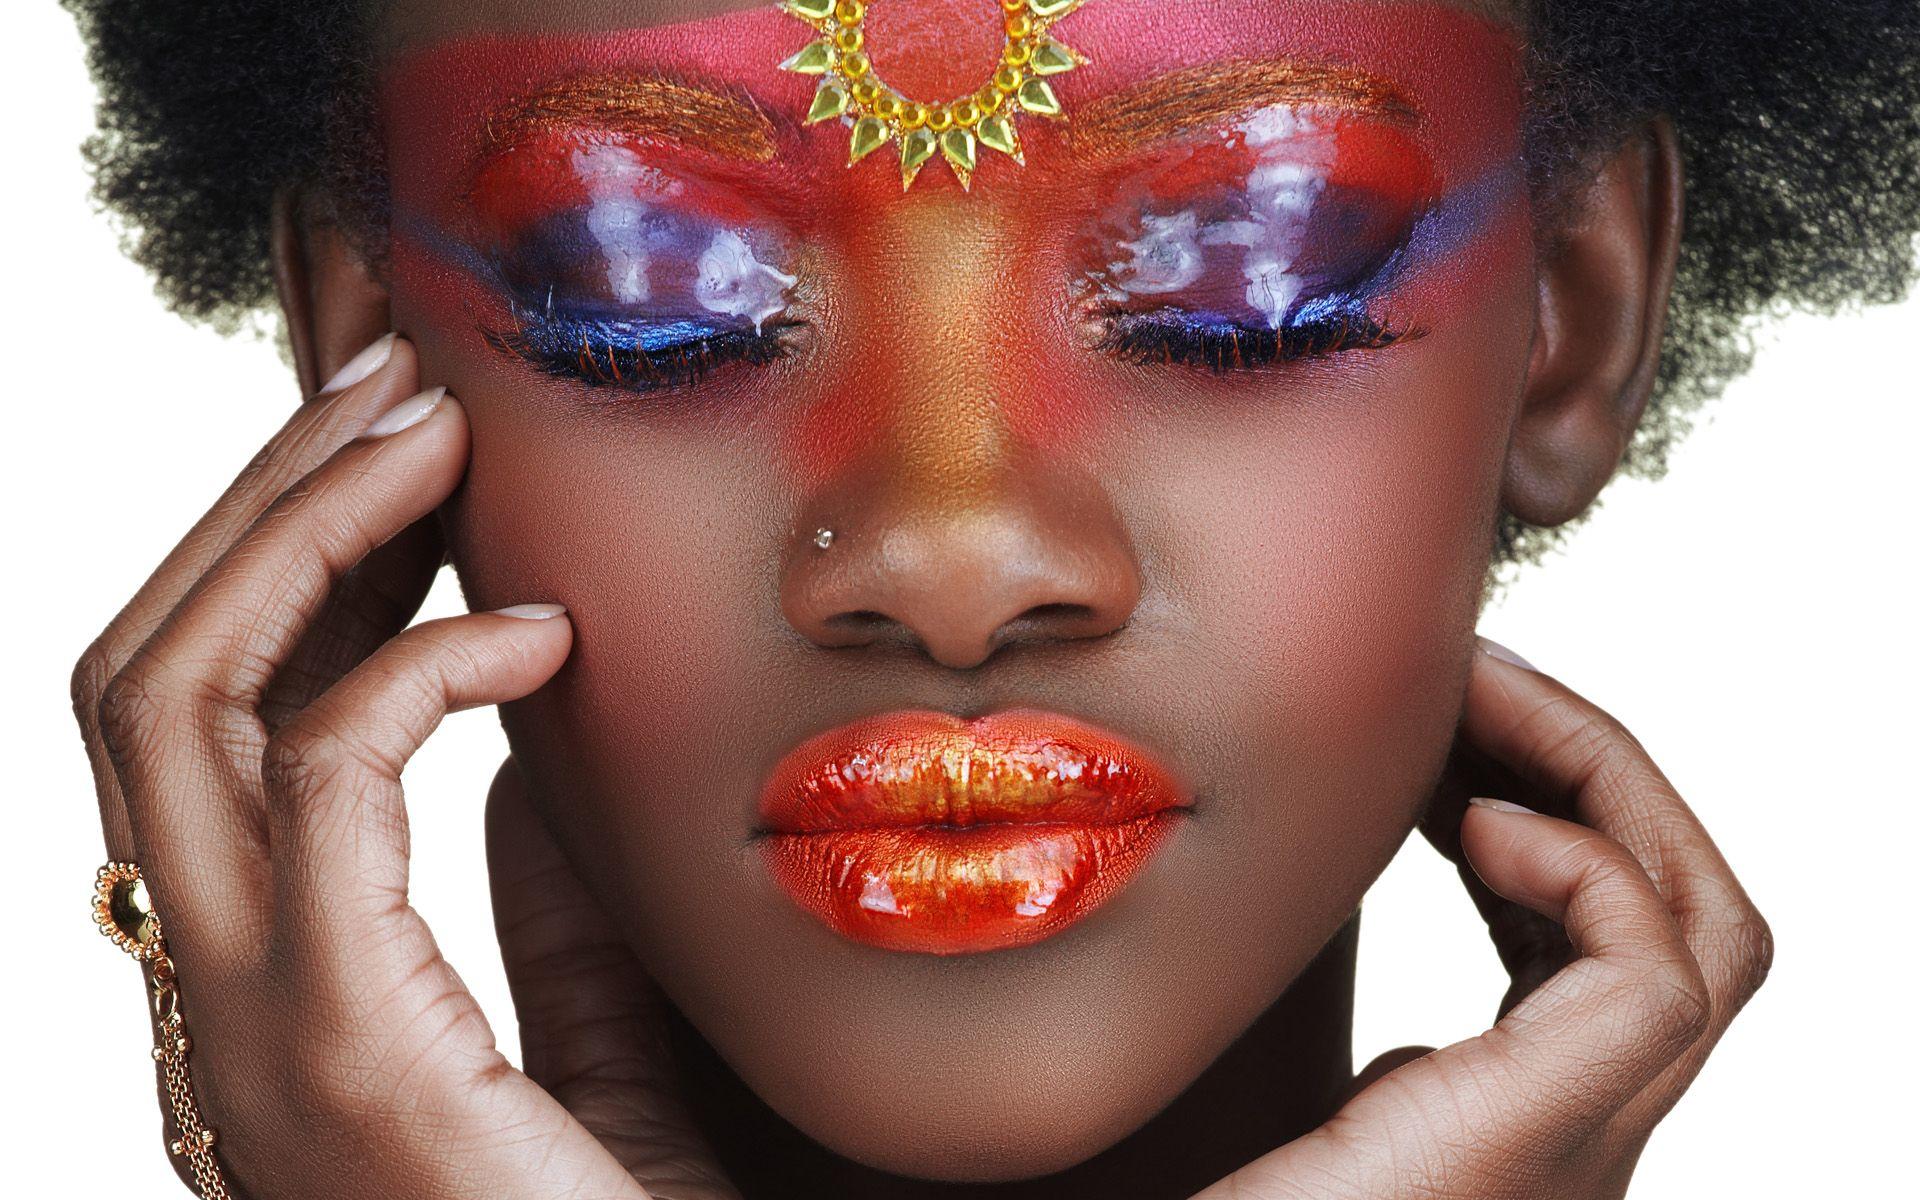 Beautiful Black Women. Black Girl With Great Make Up. Wallpaper Galaxy. Makeup For Black Women, Amazing Face, Creative Make Up Looks